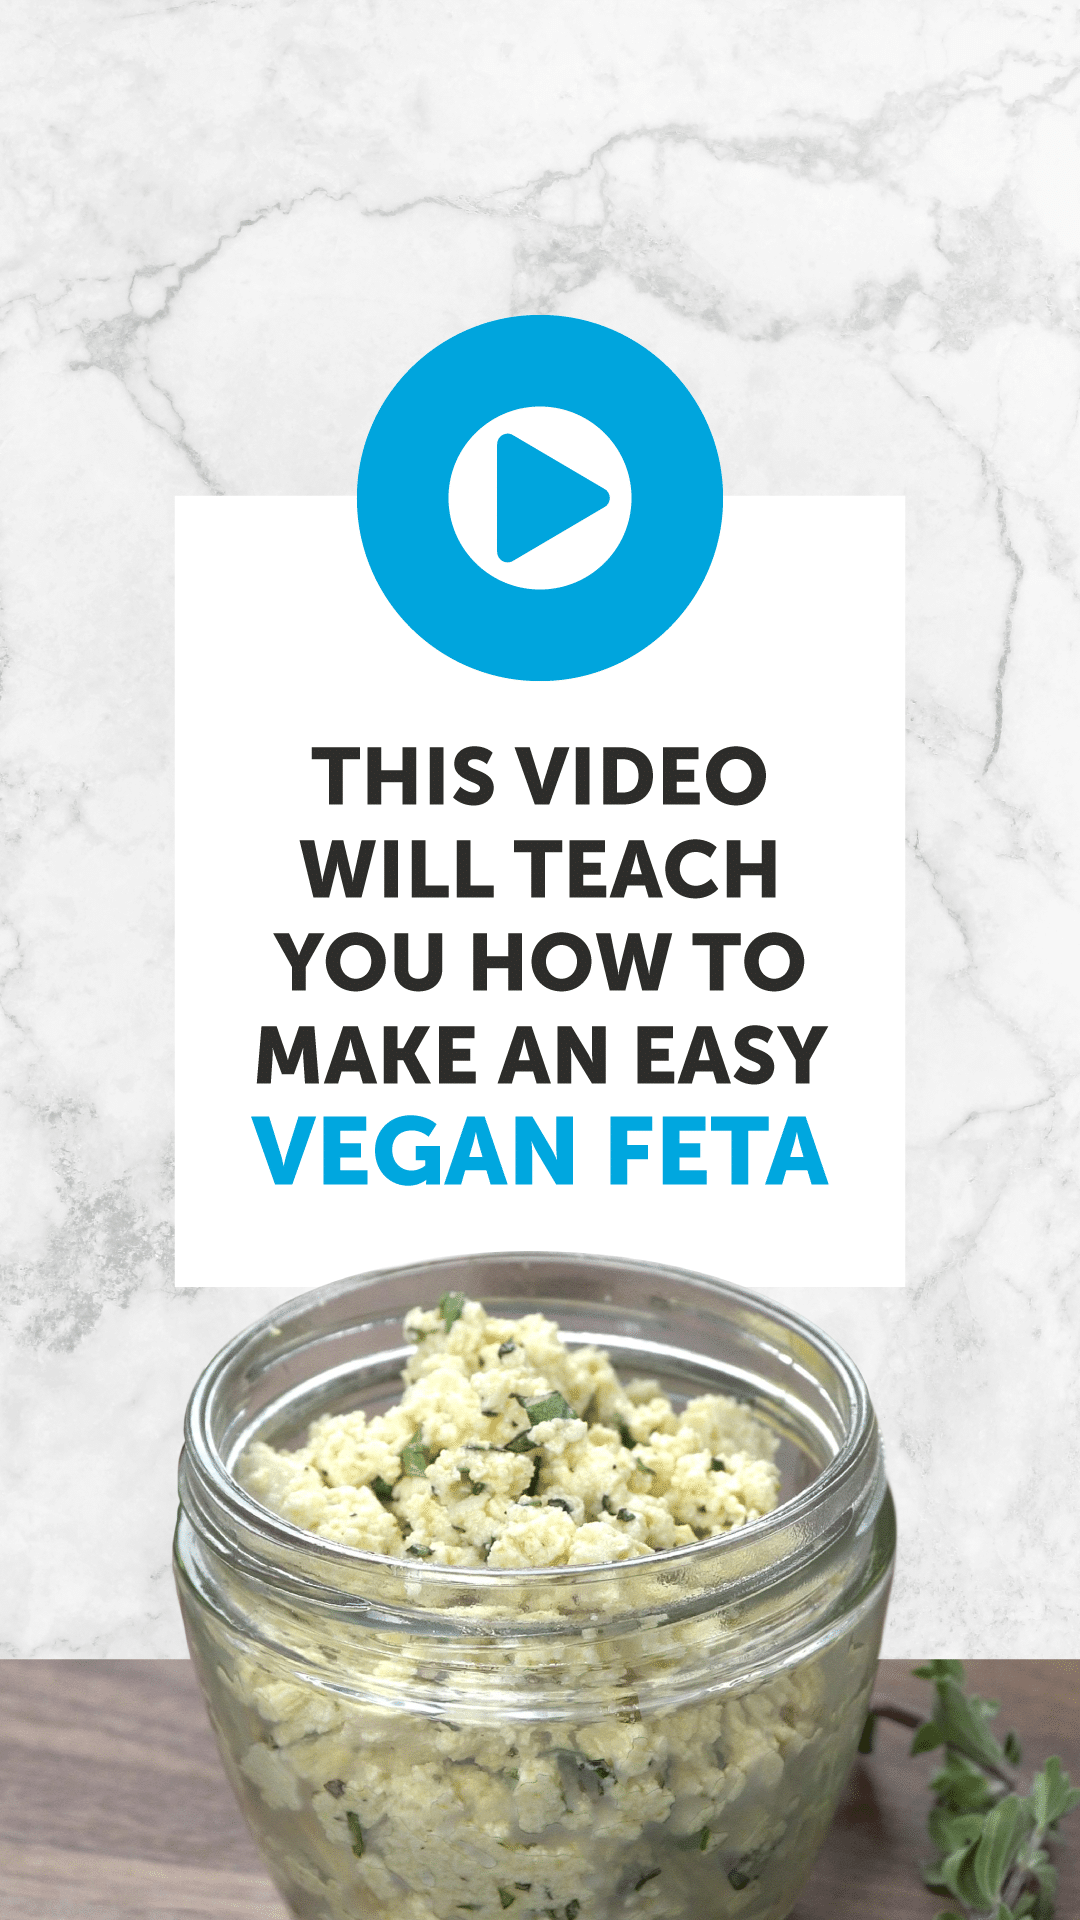 This Video Will Teach You How to Make an Easy Vegan Feta